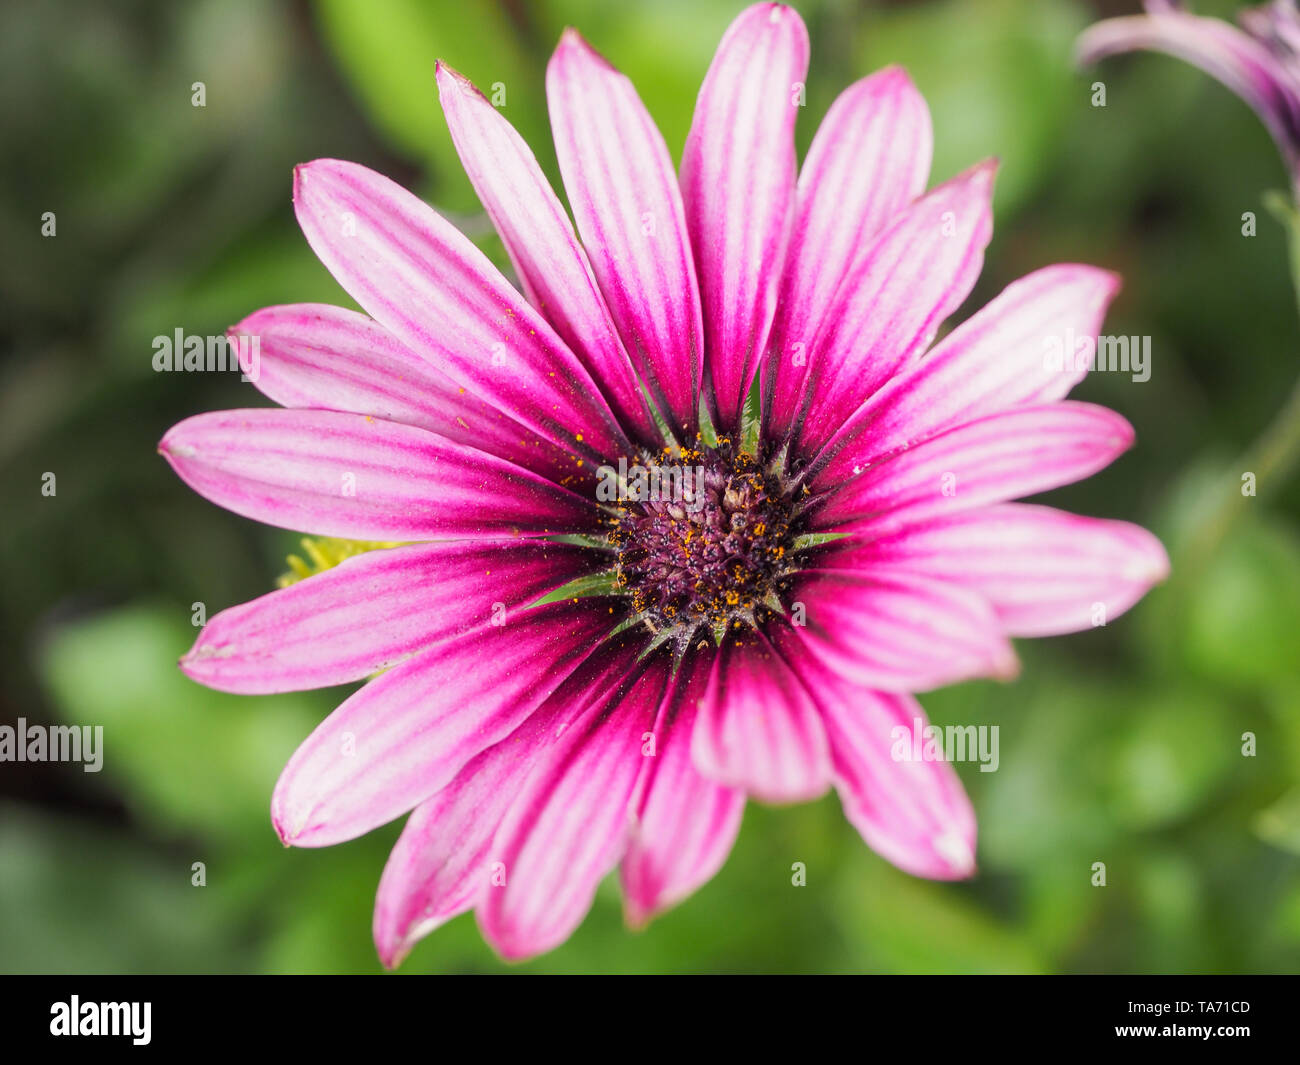 Purple Osteospermum flowers or pink daisy bushes is known as the African daisies. Dimorphotheca ecklonis is an ornamental evergreen perennial plant. Stock Photo